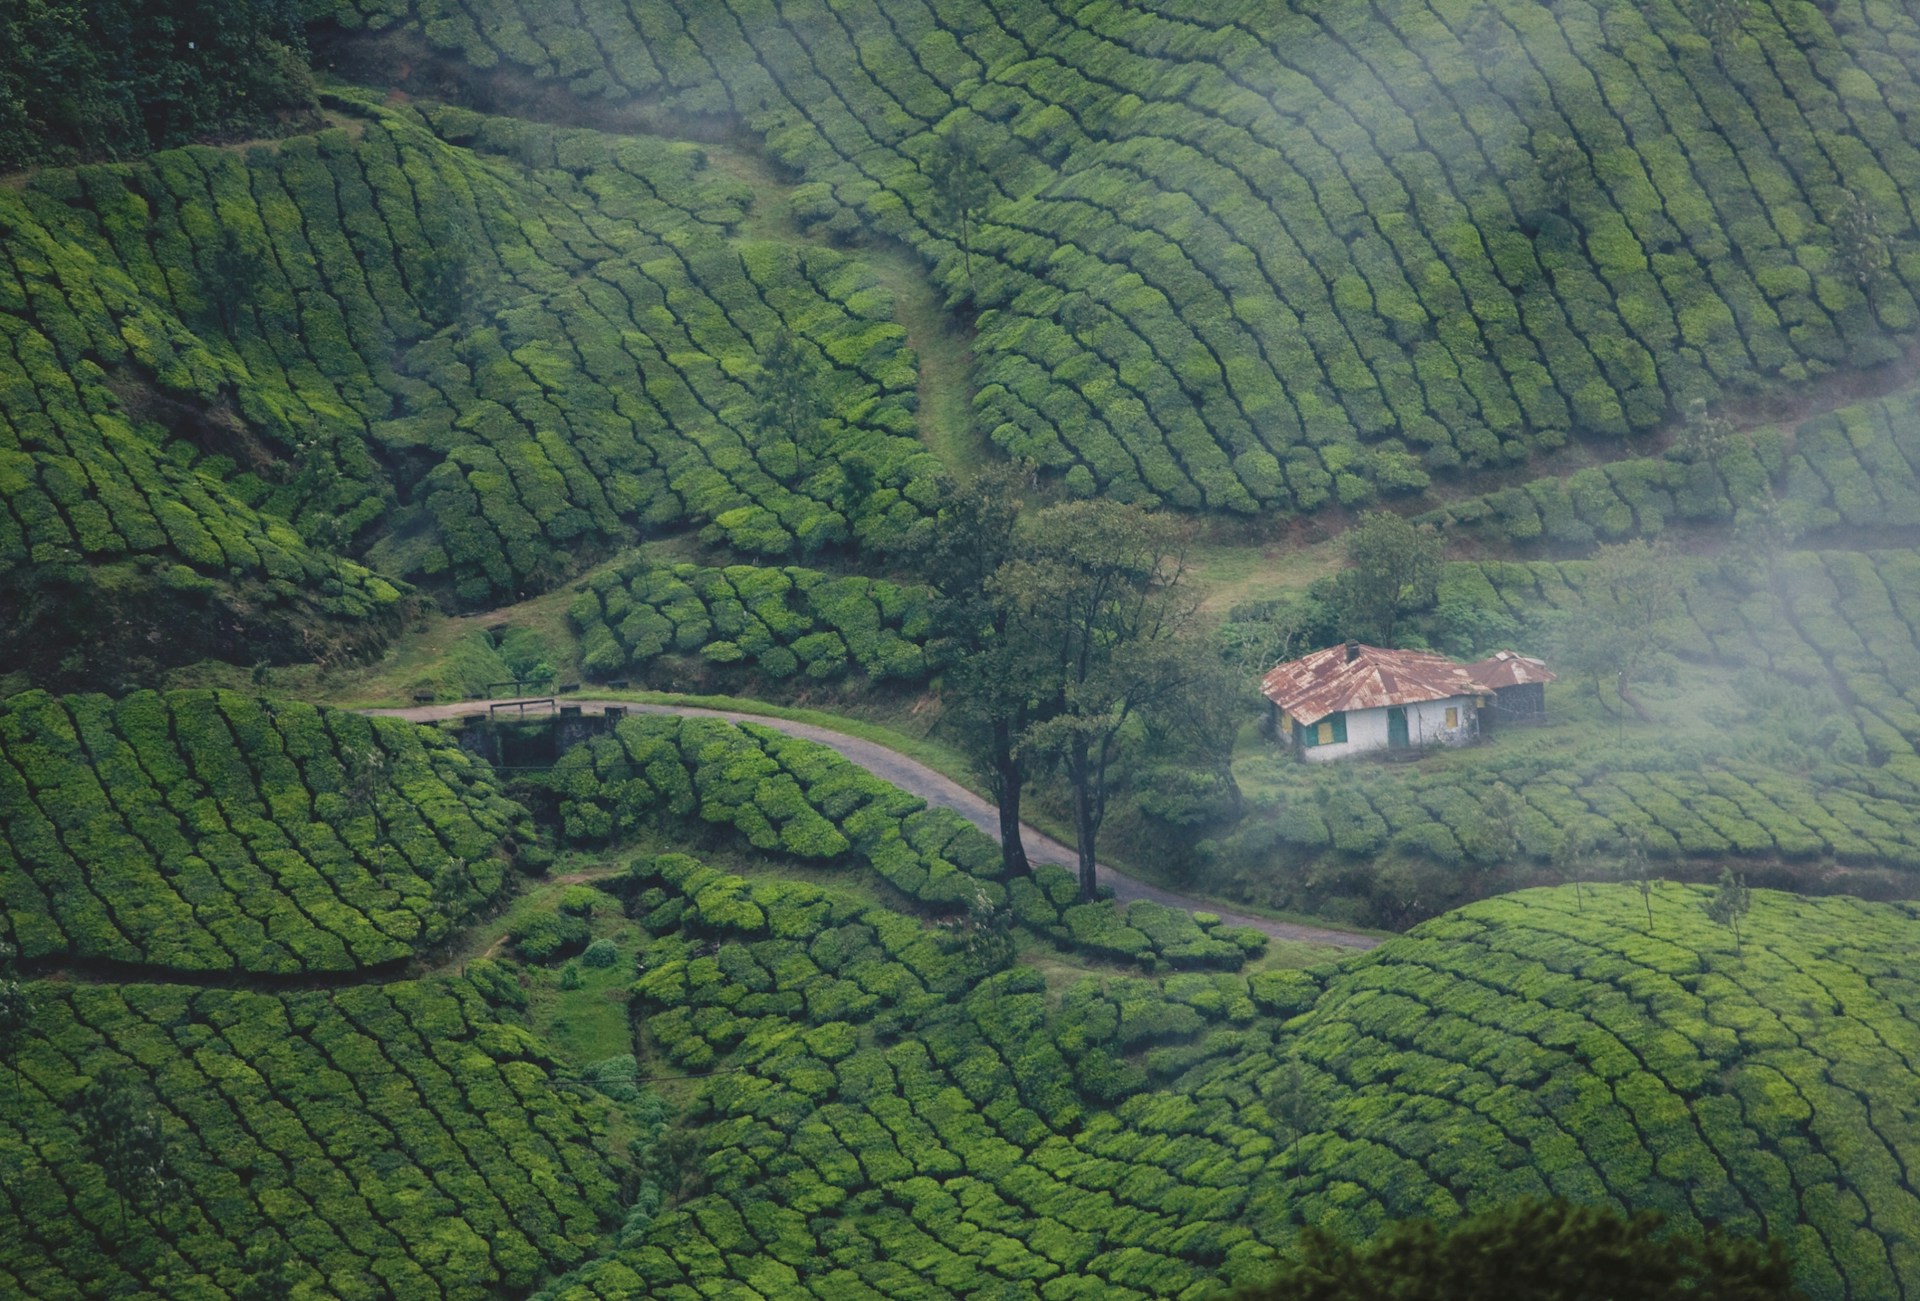 Discover Kerala - A Journey to God's Own Country